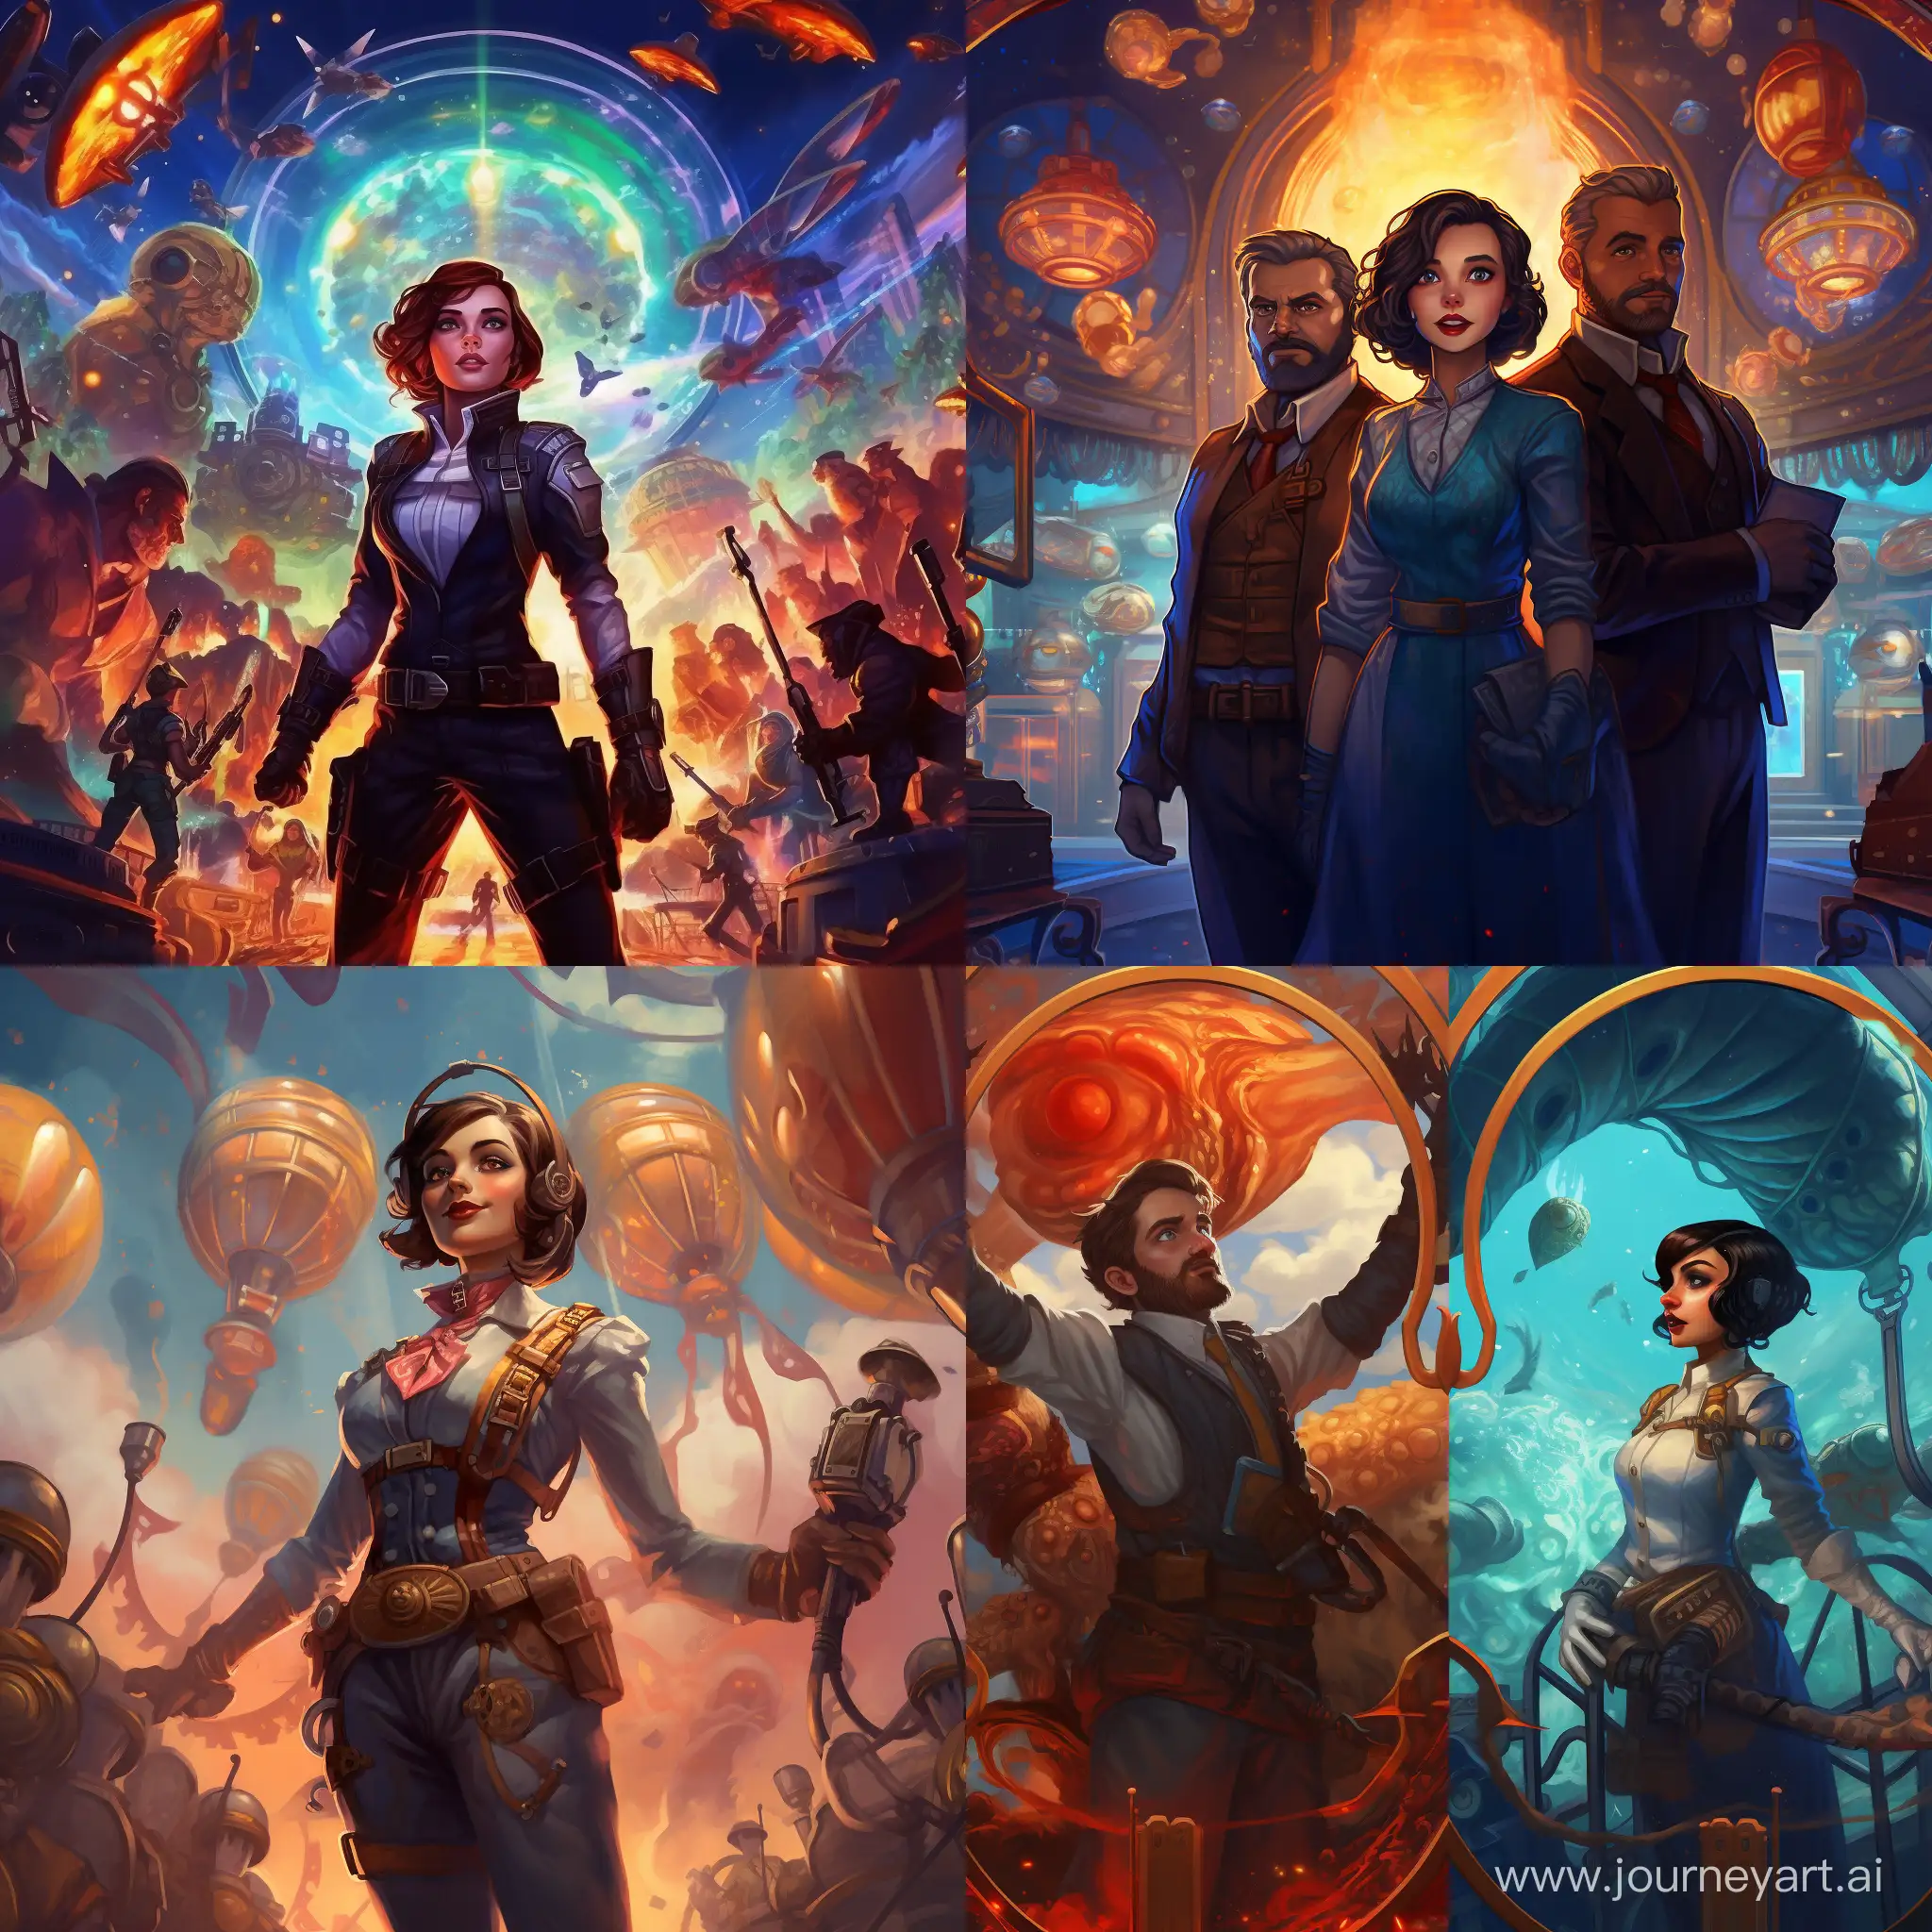 Bioshock Infinite inspired painting set in solar punk universe in the future